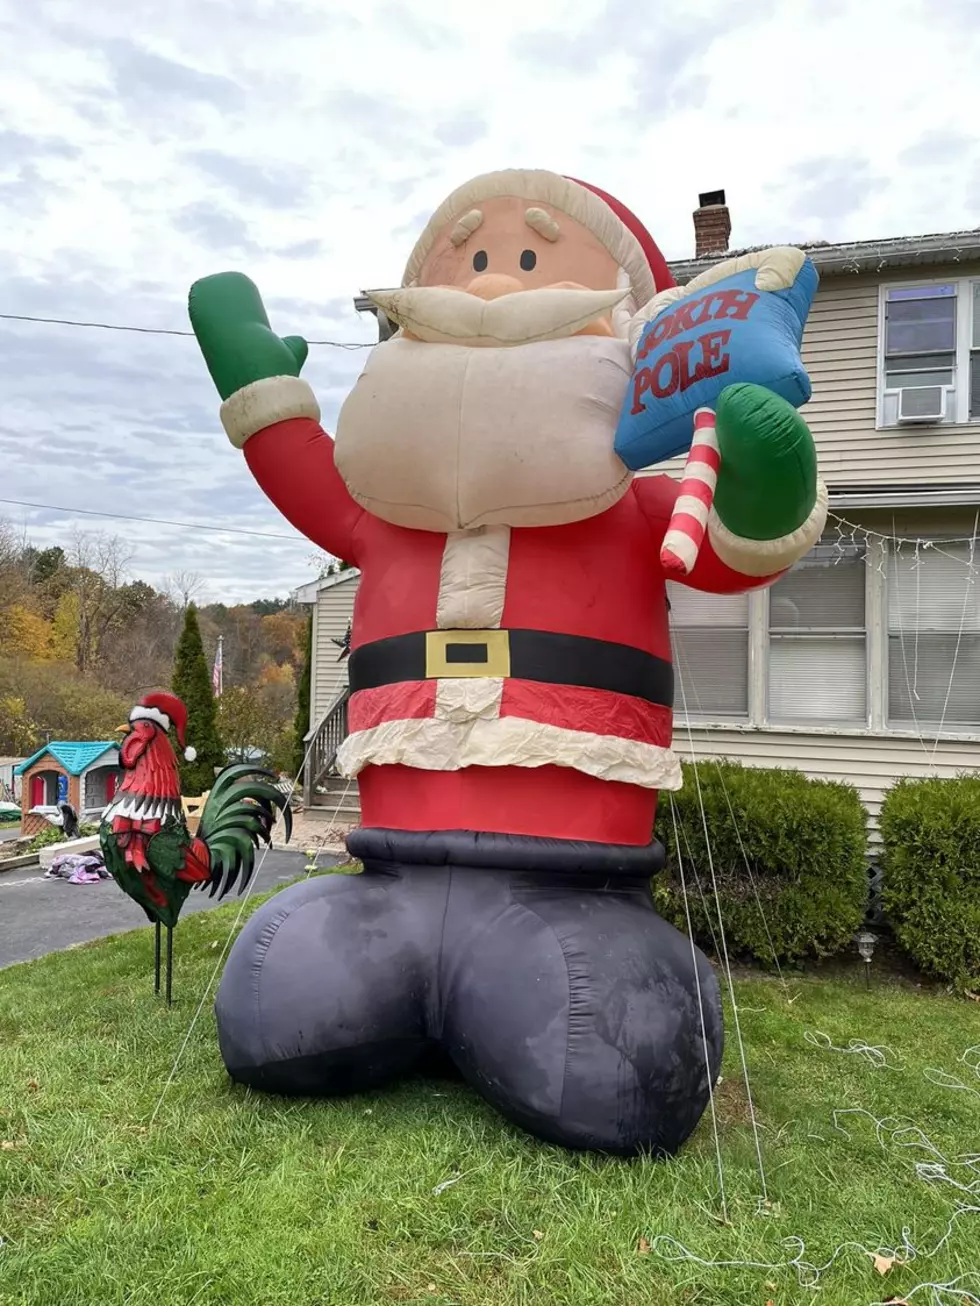 Epic New England Holiday Display With 235 Inflatables, 50,000 Lights to End After 30 Years